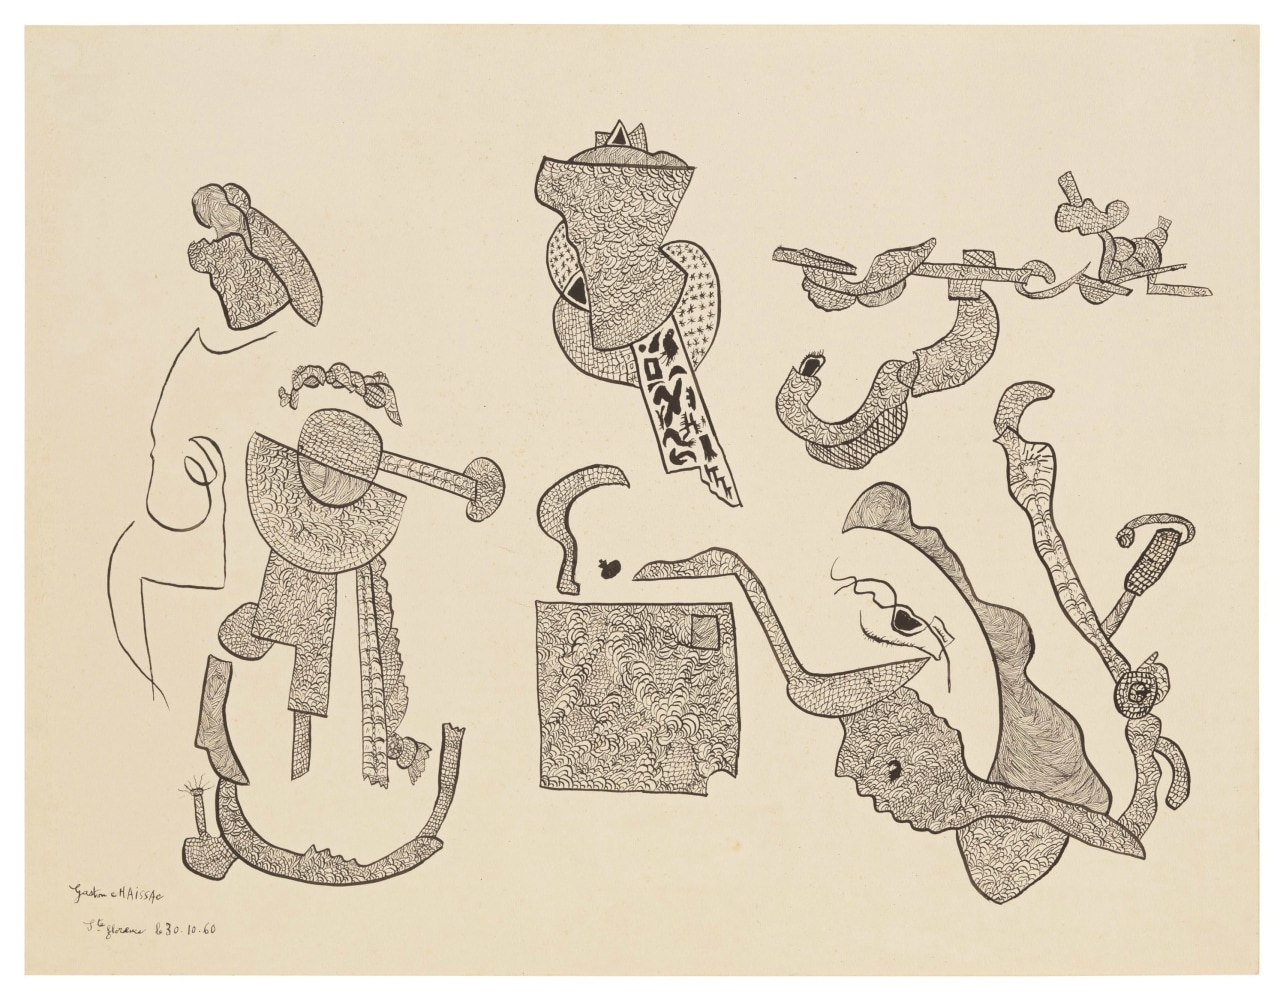 &amp;ldquo;Untitled&amp;rdquo;, 1960
India ink on paper
19 1/2 x 25 1/2 inches
49.5 x 64.5 cm
CHA 5